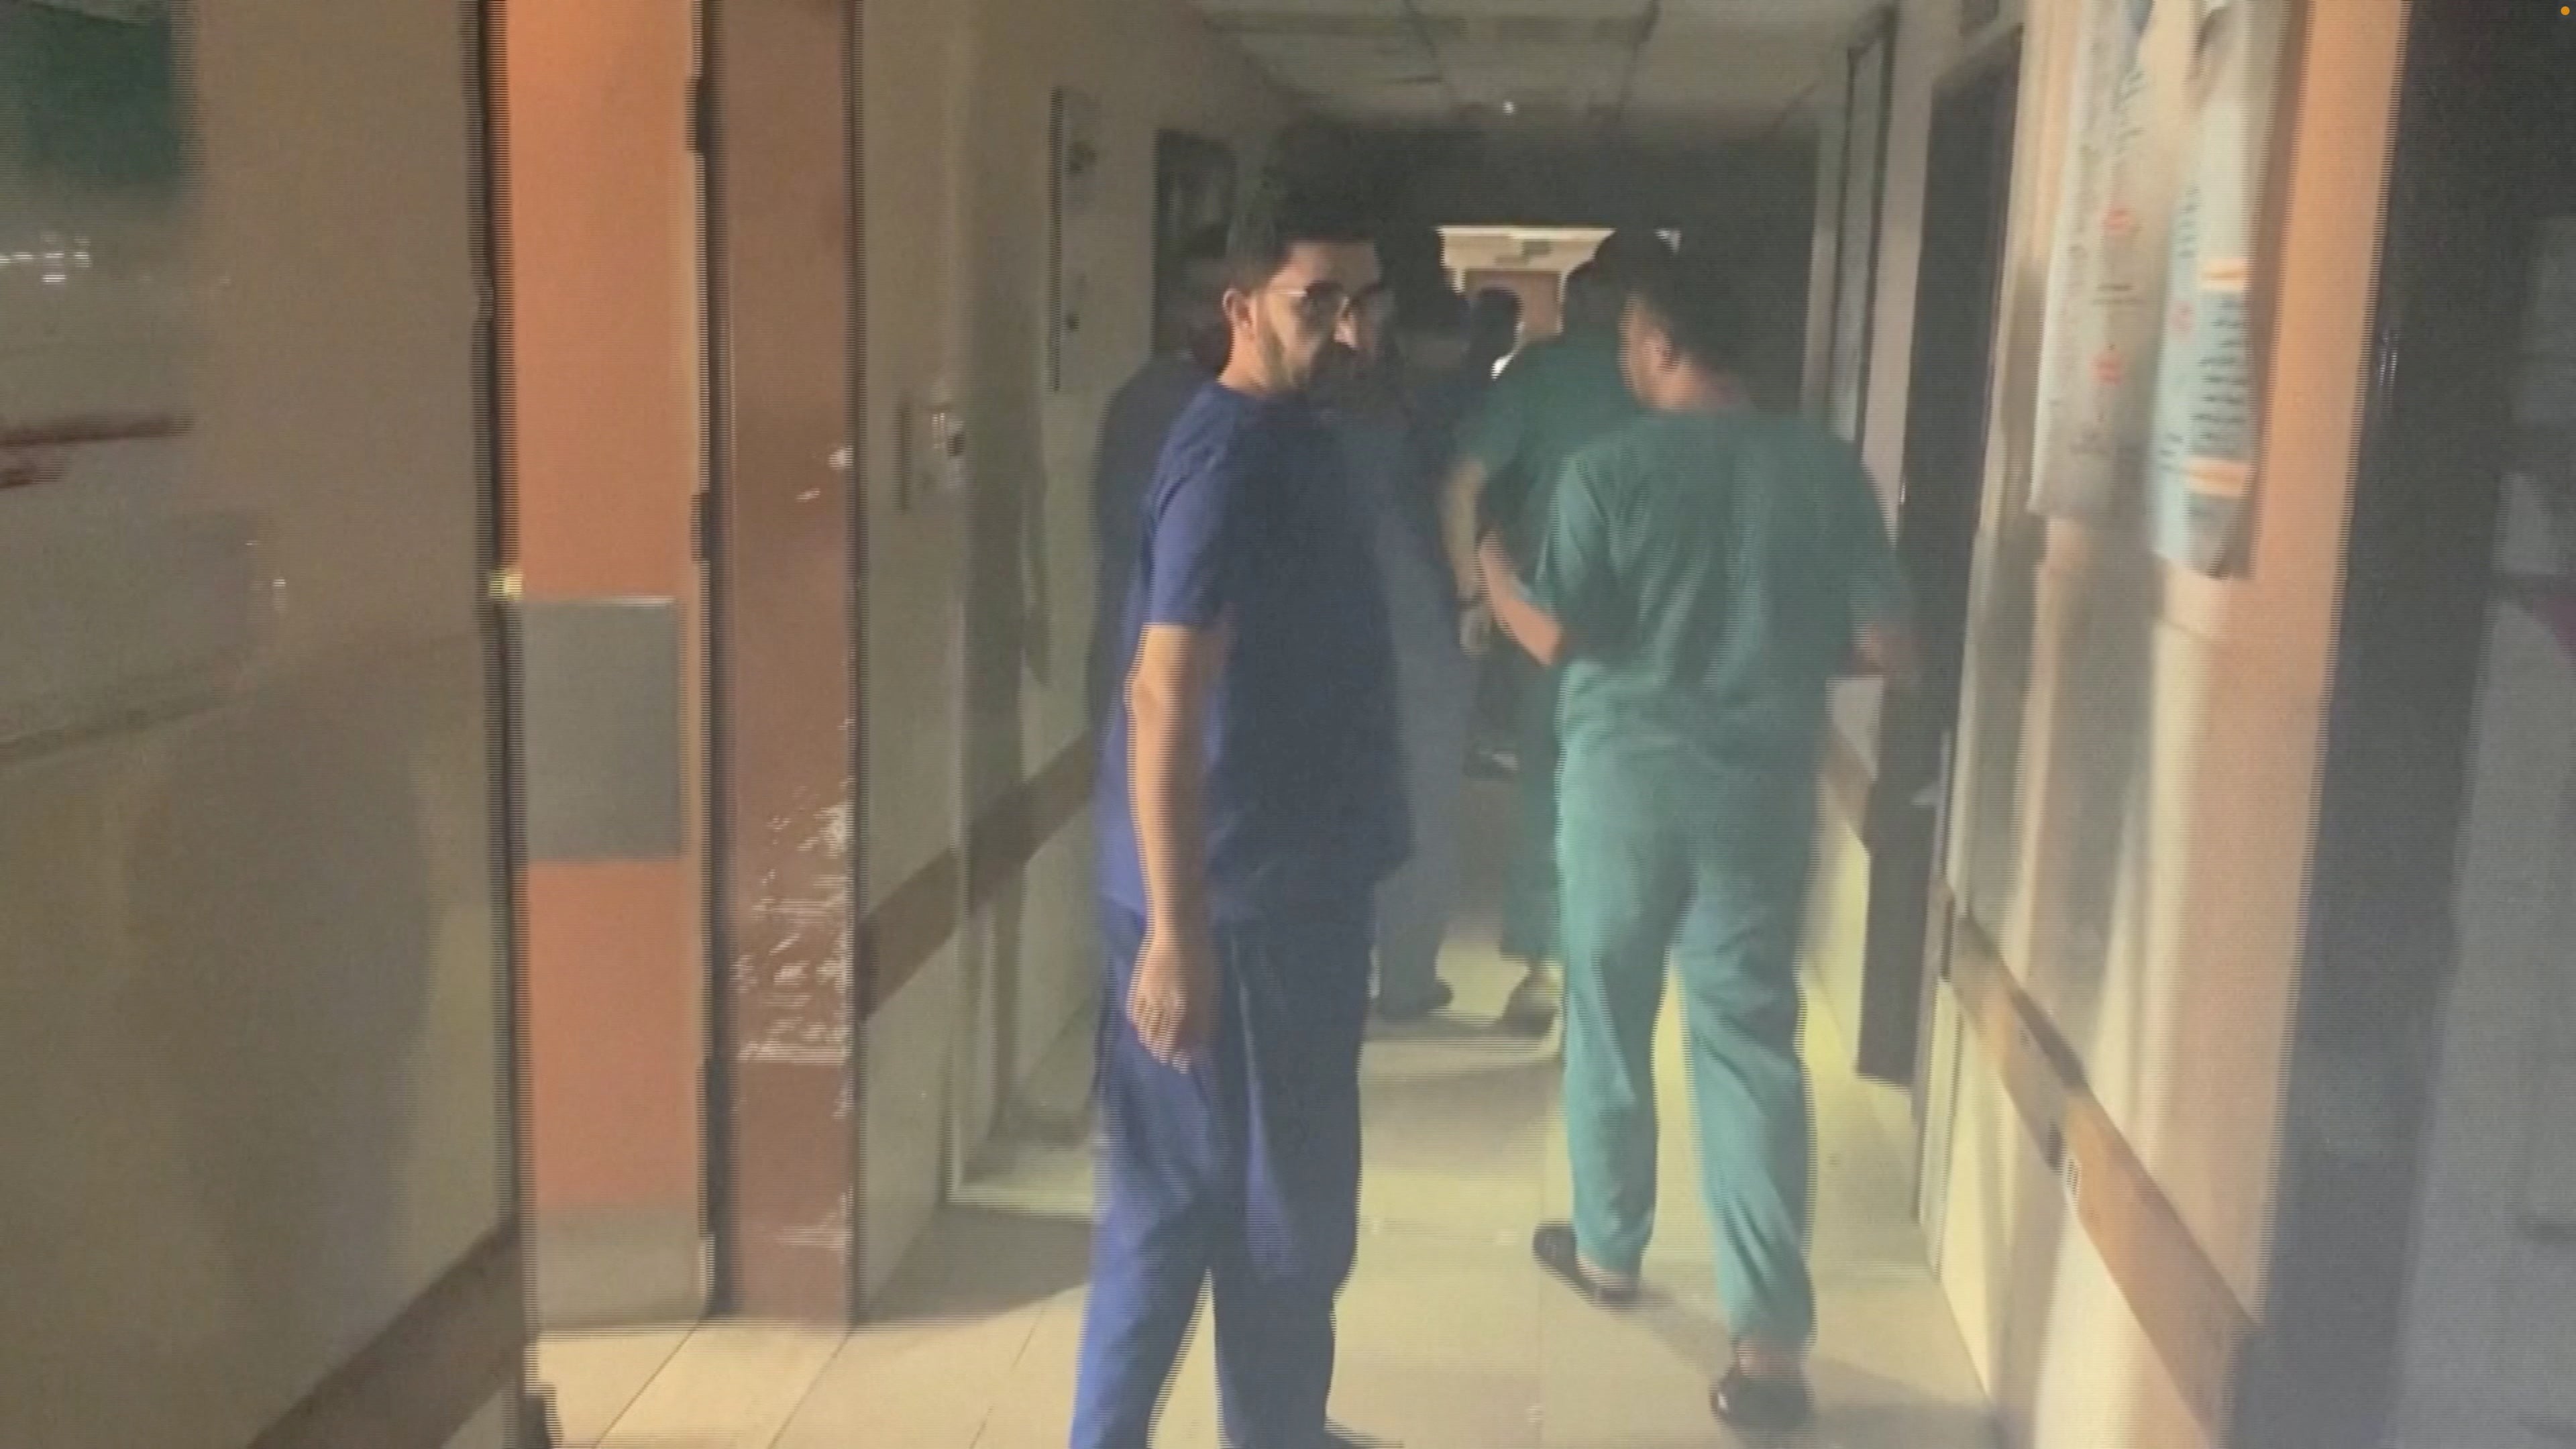 Medics inside al-Shifa hospital, which Israel claims is concealing a Hamas command and control facility